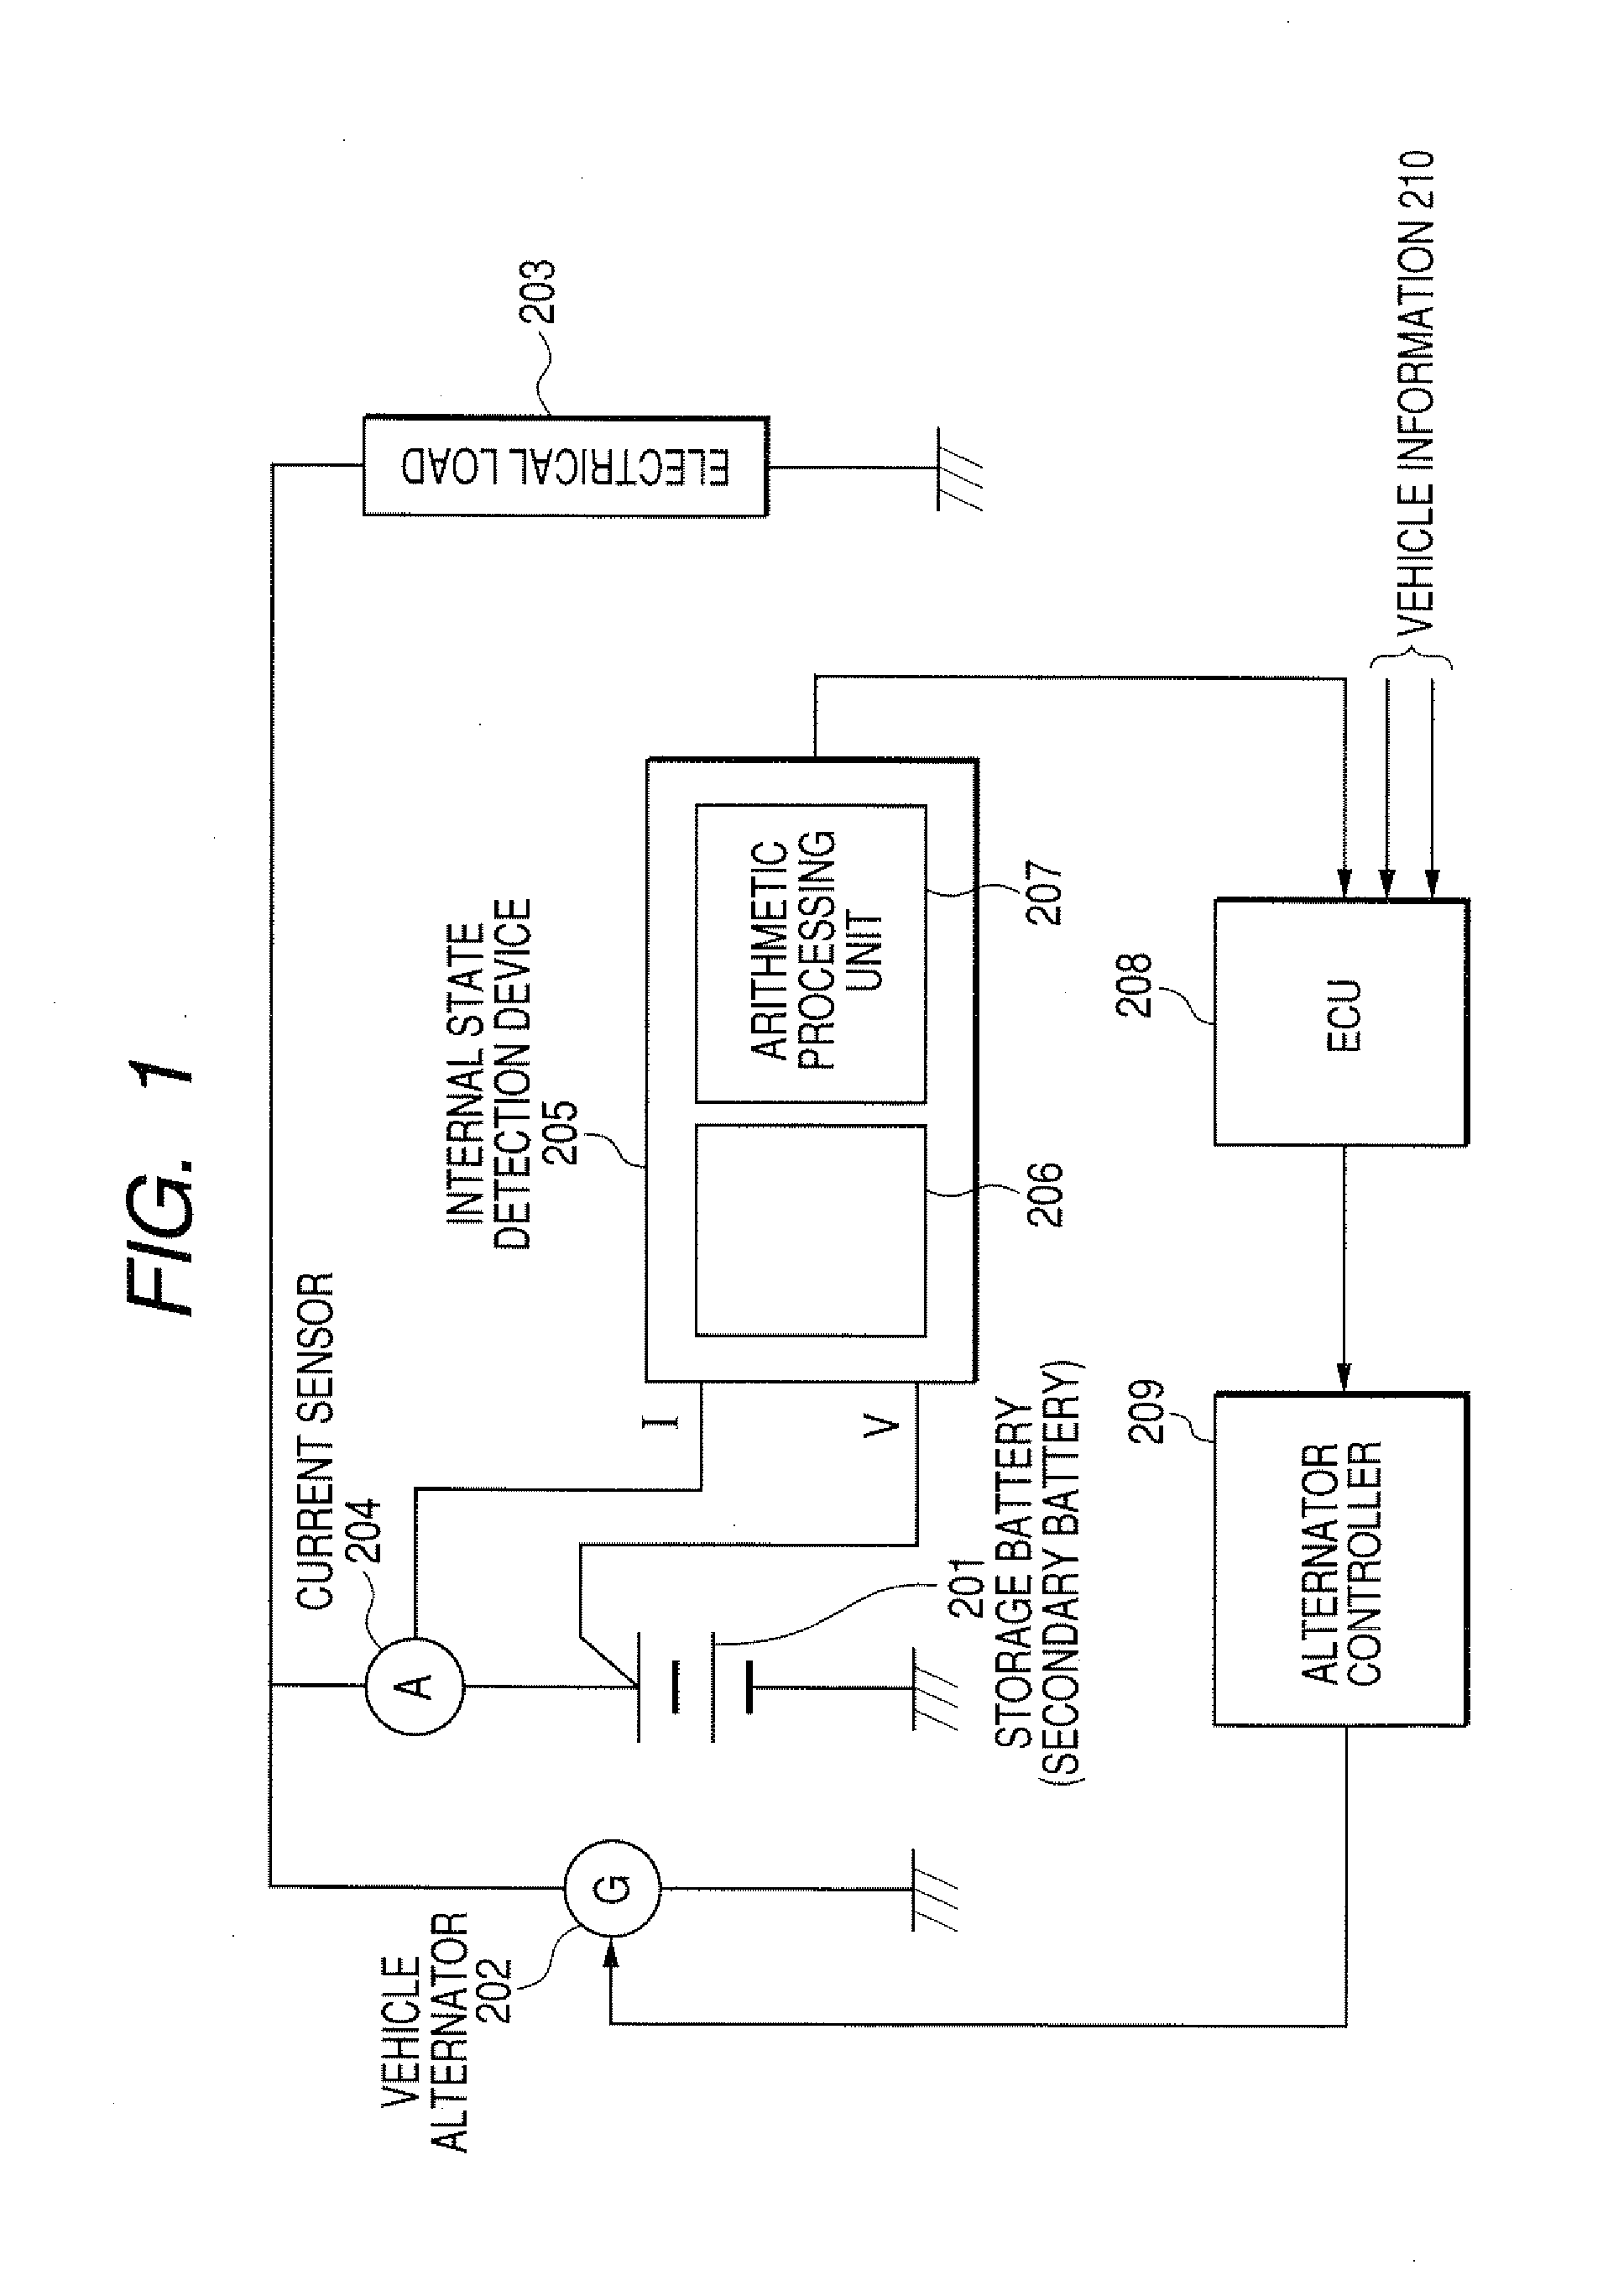 Method of calculating internal resistance of secondary battery for vehicle